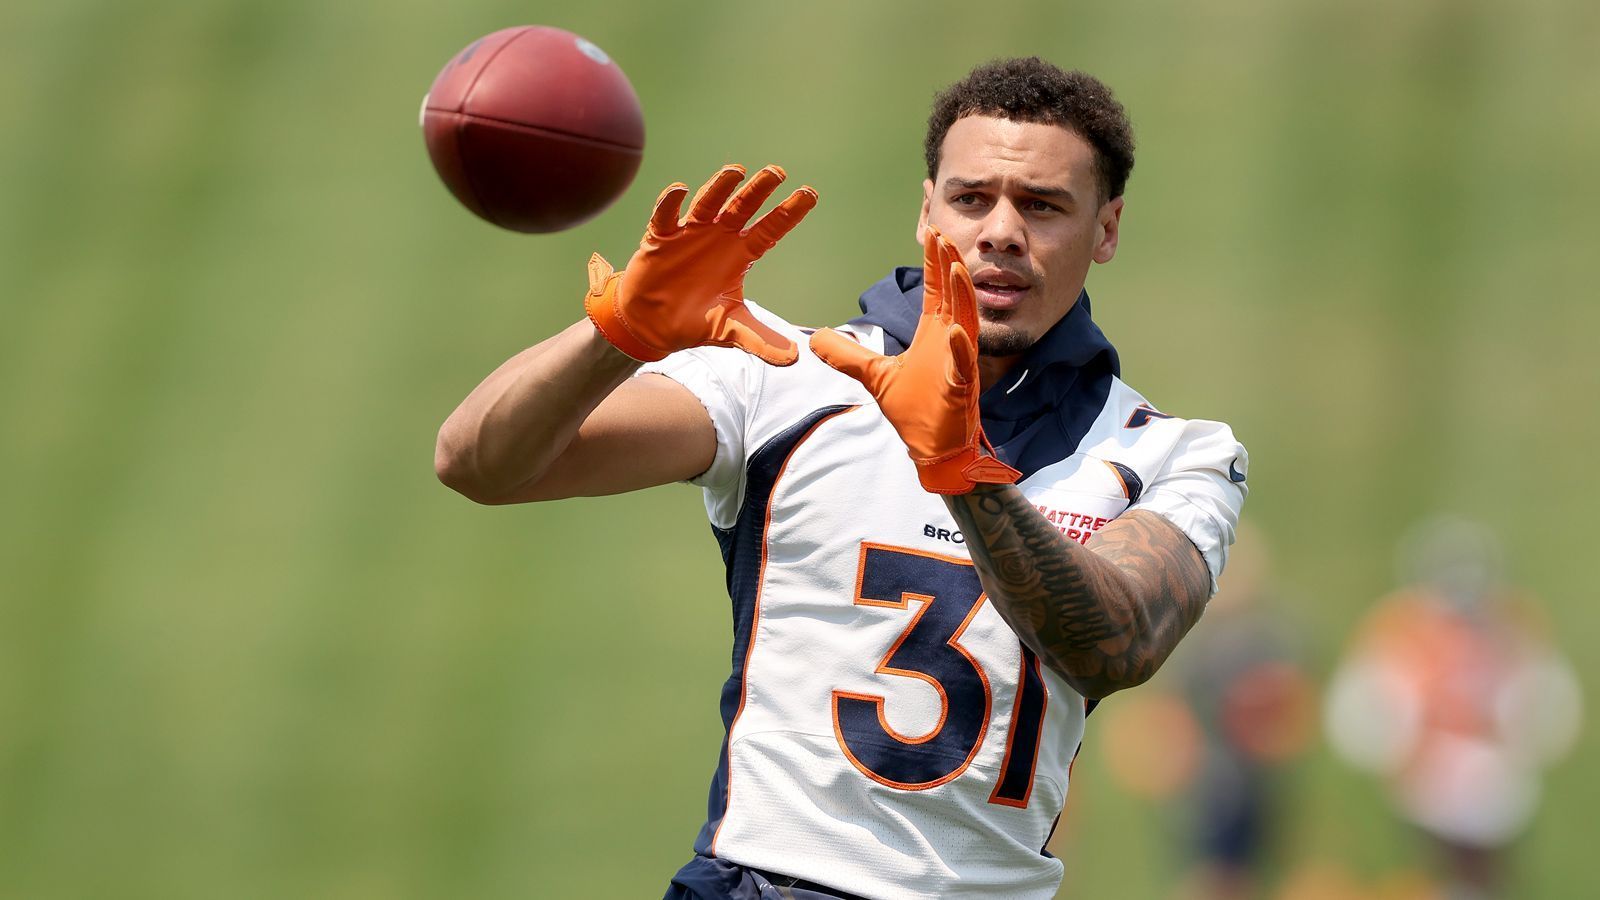 
                <strong>Platz 5 (geteilt): Justin Simmons</strong><br>
                &#x2022; Team: Denver Broncos<br>&#x2022; Position: Free Safety<br>&#x2022; <strong>Overall Rating: 91</strong><br>&#x2022; Beste Key Stats: Agility: 95 - Jumping: 96 - Play Recognition: 93<br>
              